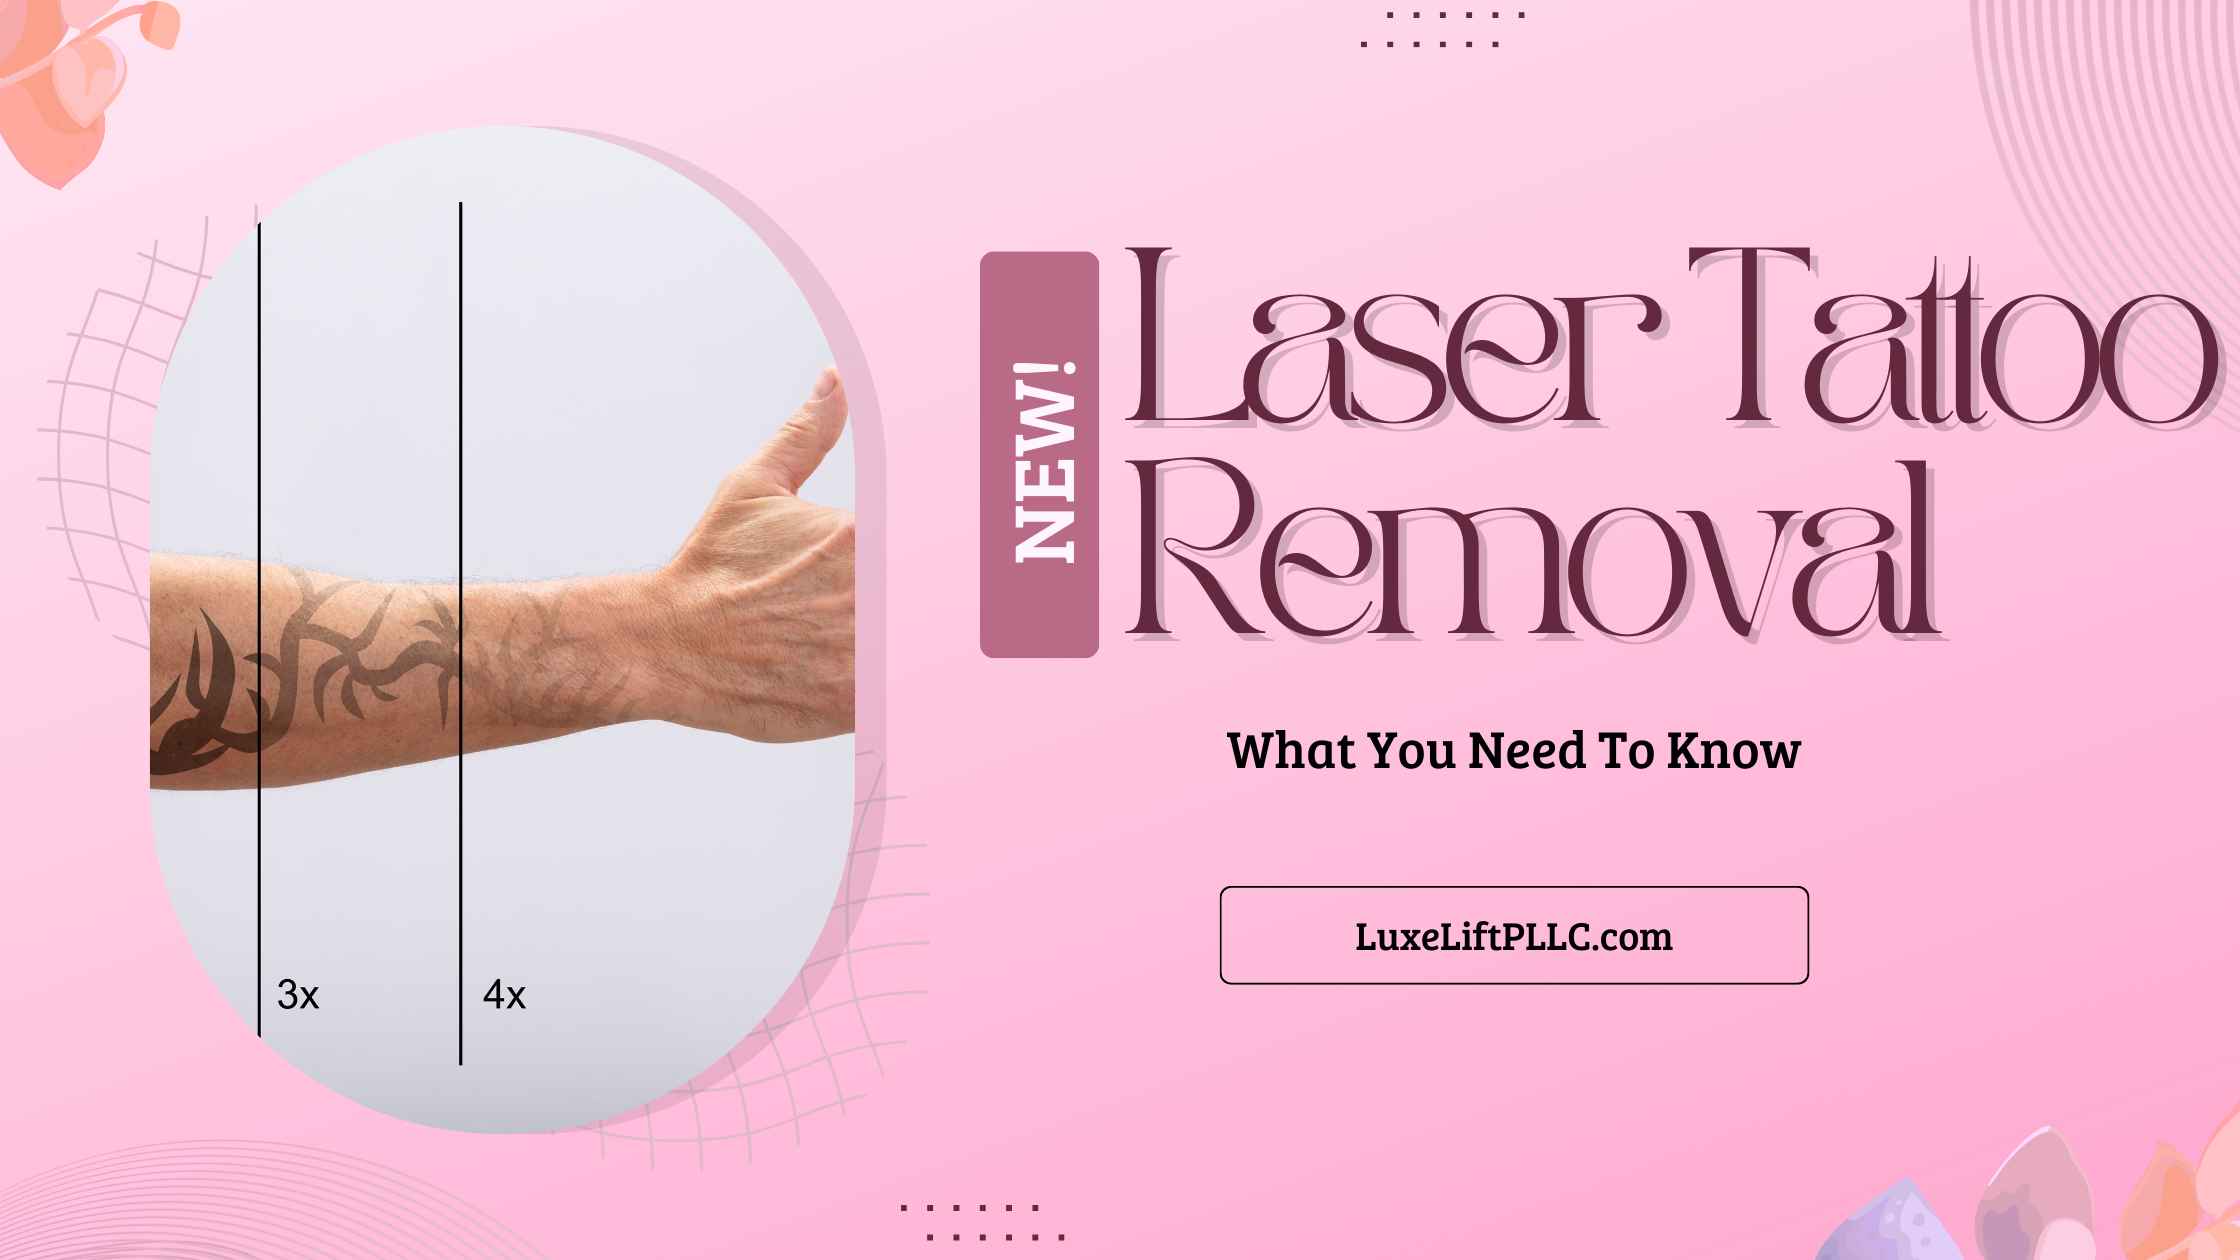 The Complete Guide to Laser Tattoo Removal: What You Need to Know